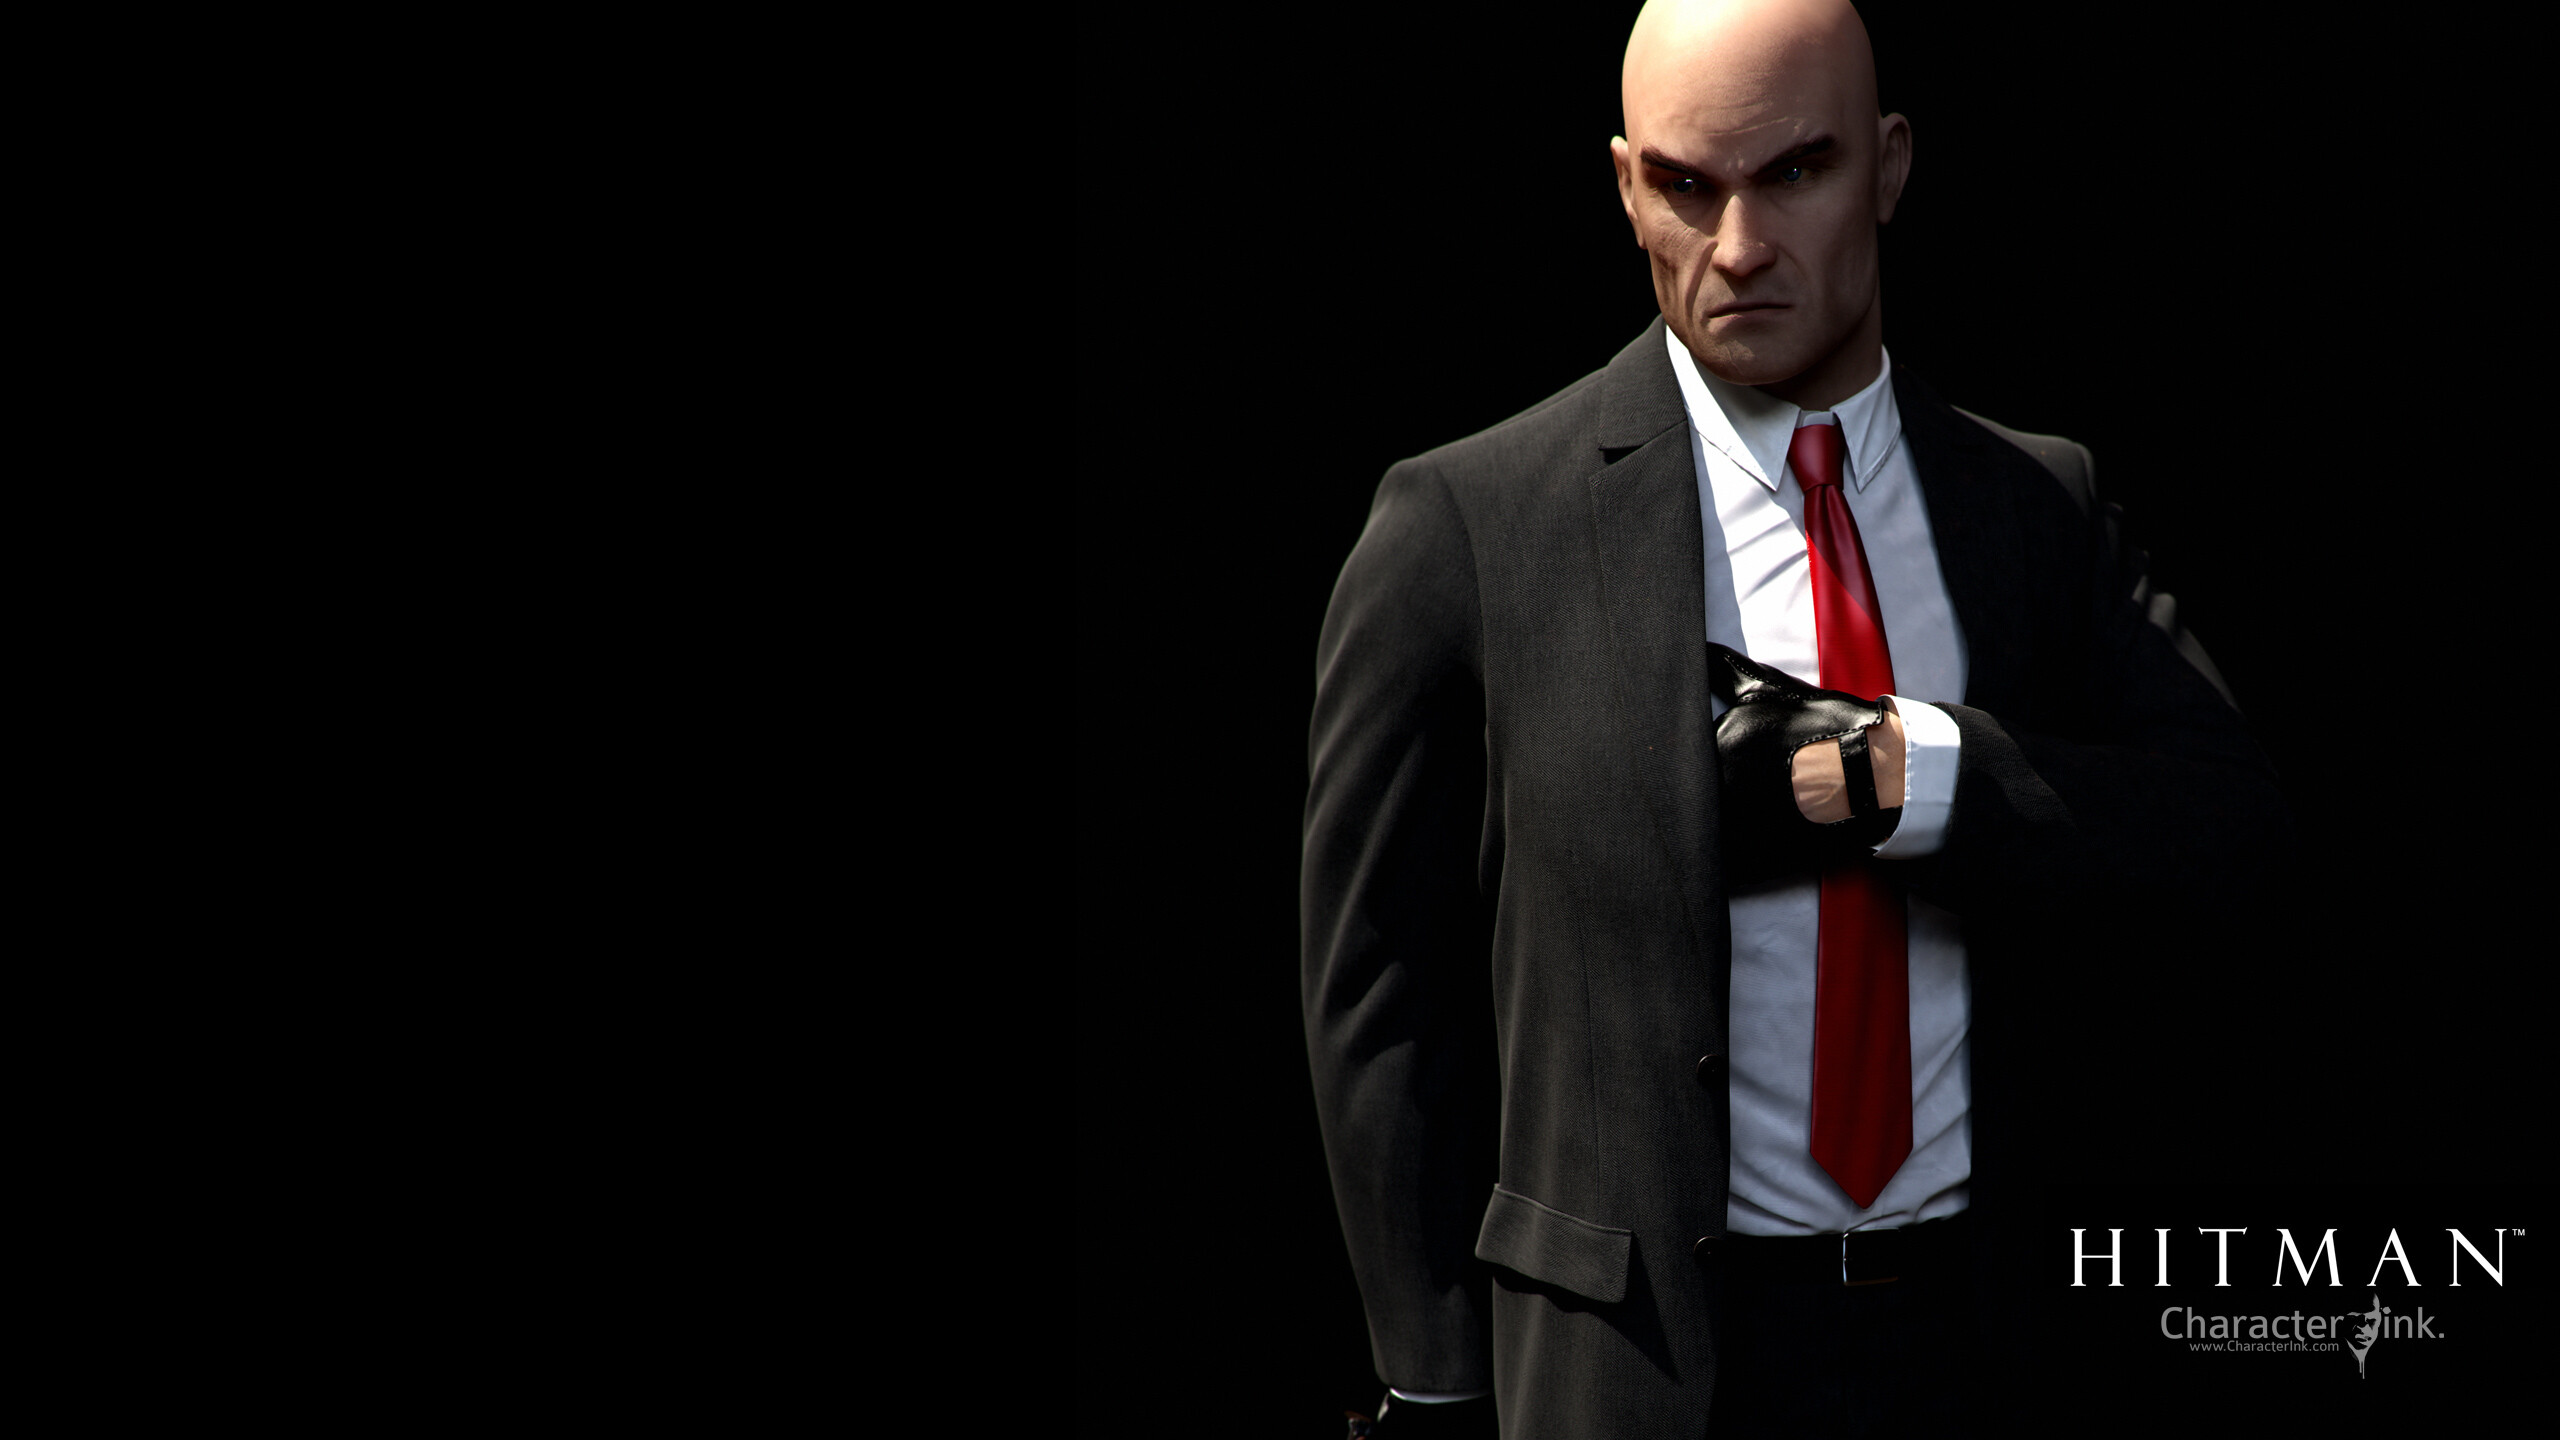 Hitman (Game): 47, A fictional character, the protagonist and the player character. 2560x1440 HD Background.